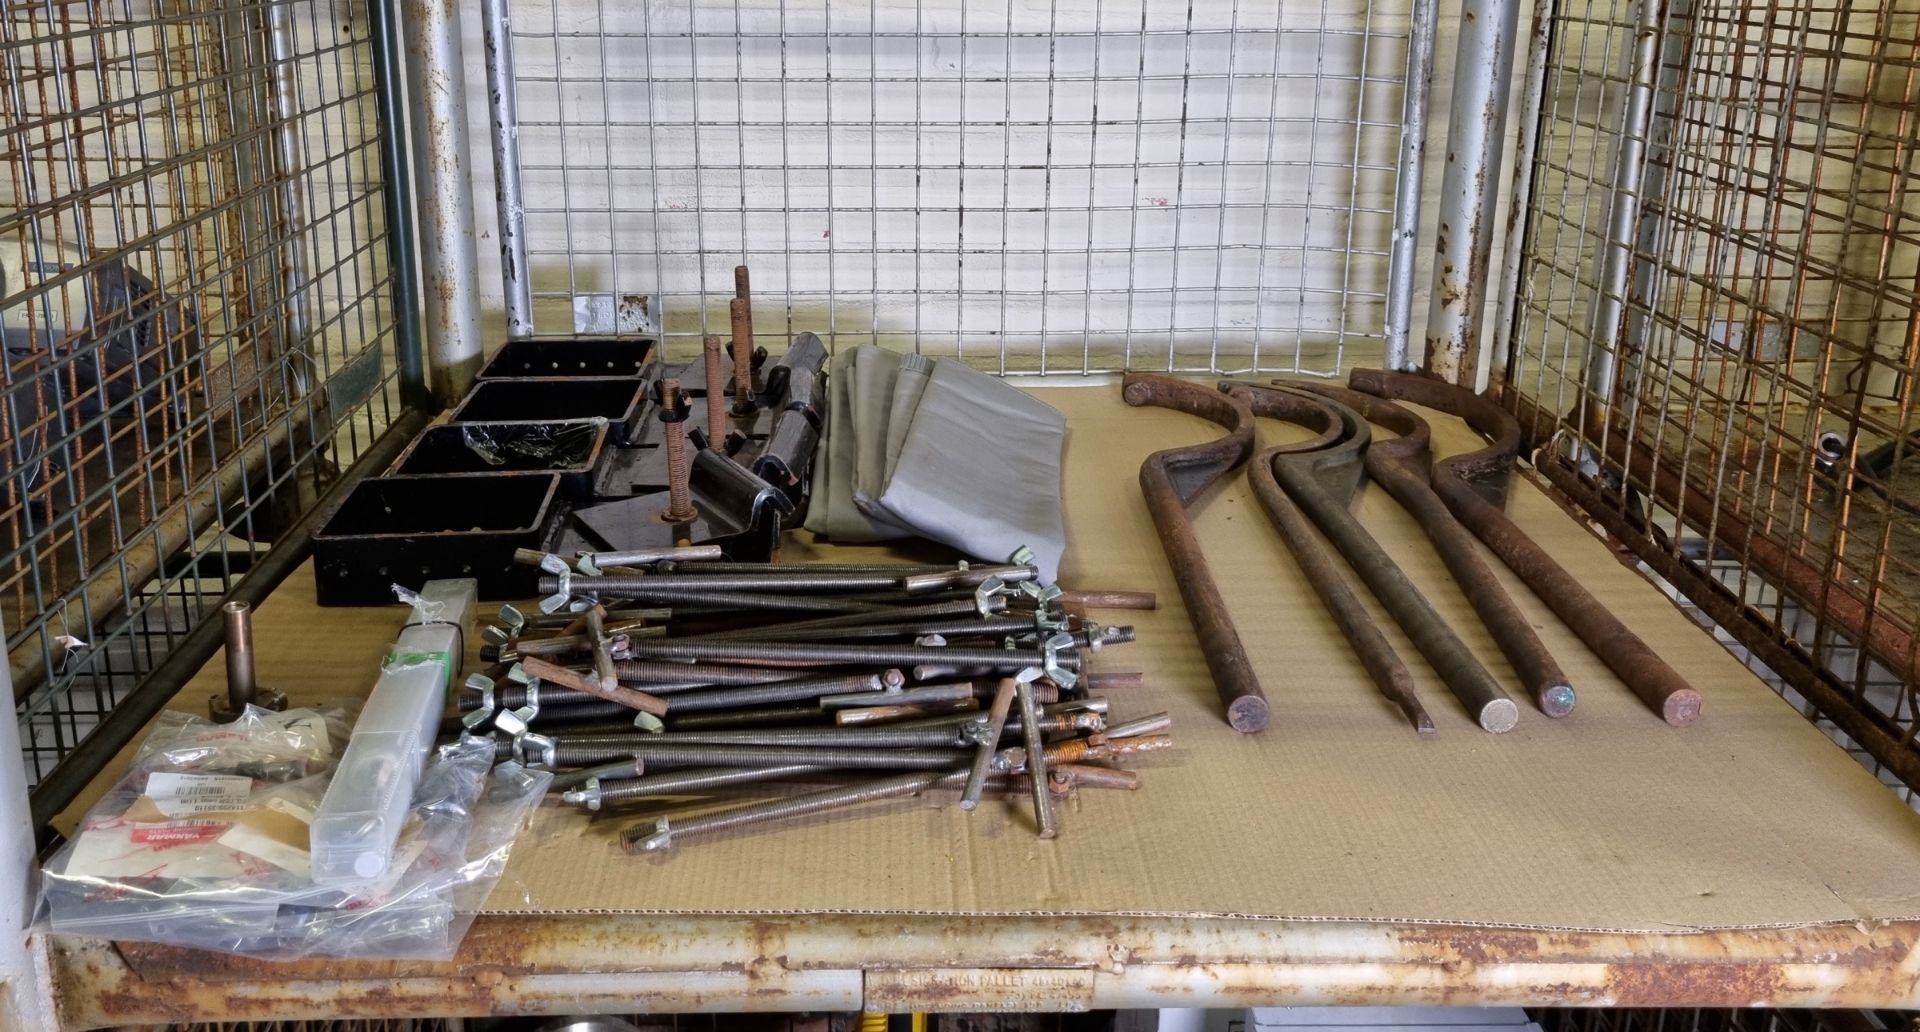 Workshop equipment - C spanners, clamps, threaded bolt hooks, transducer, insulated covers, filters